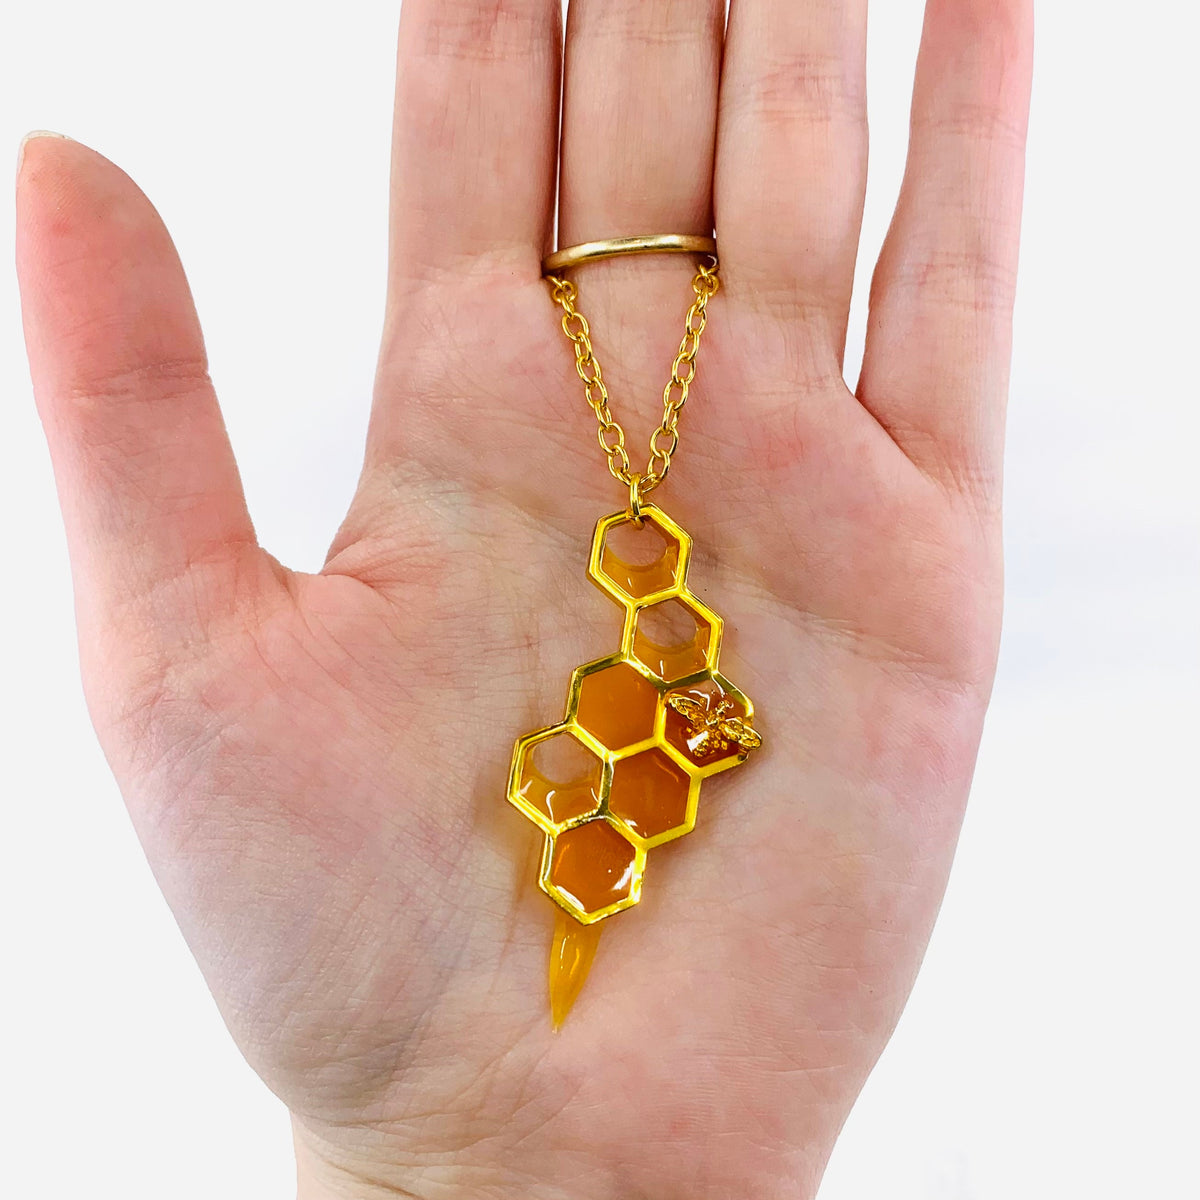 Honeycomb Necklace Manufactured Overseas 